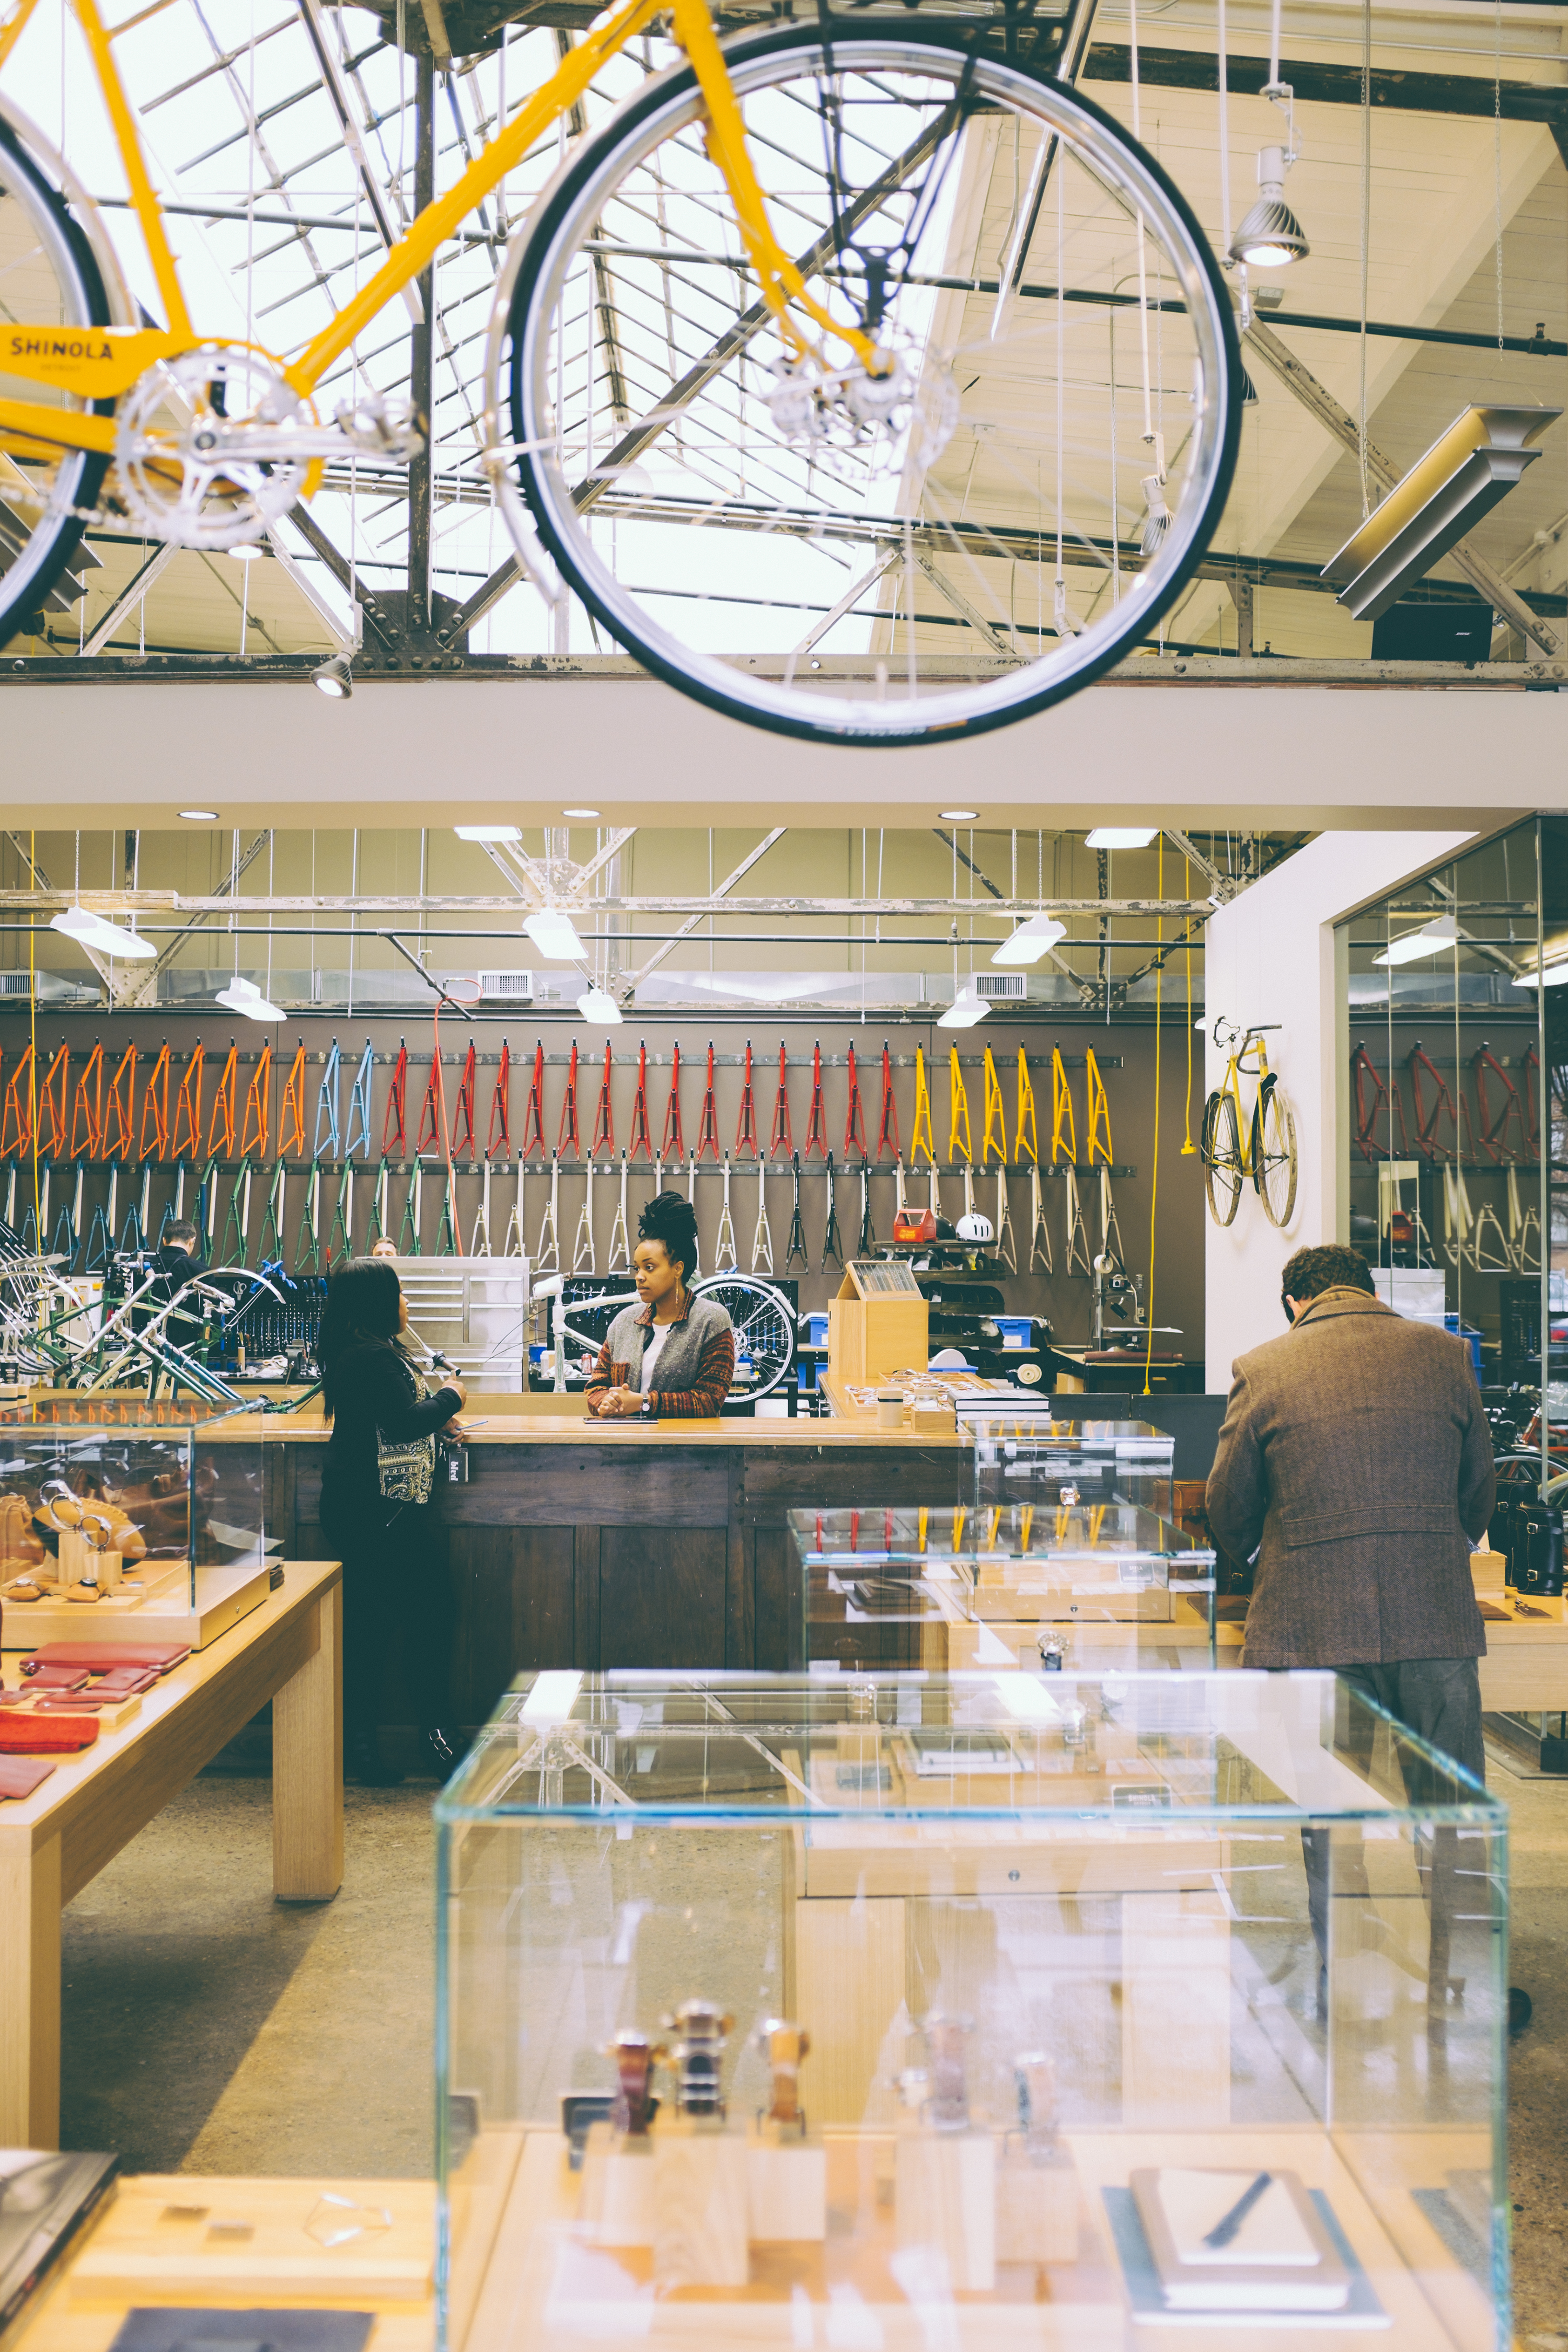 Shinola's Detroit store sells its U.S.-made watches and hand assembled bikes. (Roy Ritchie for TIME)